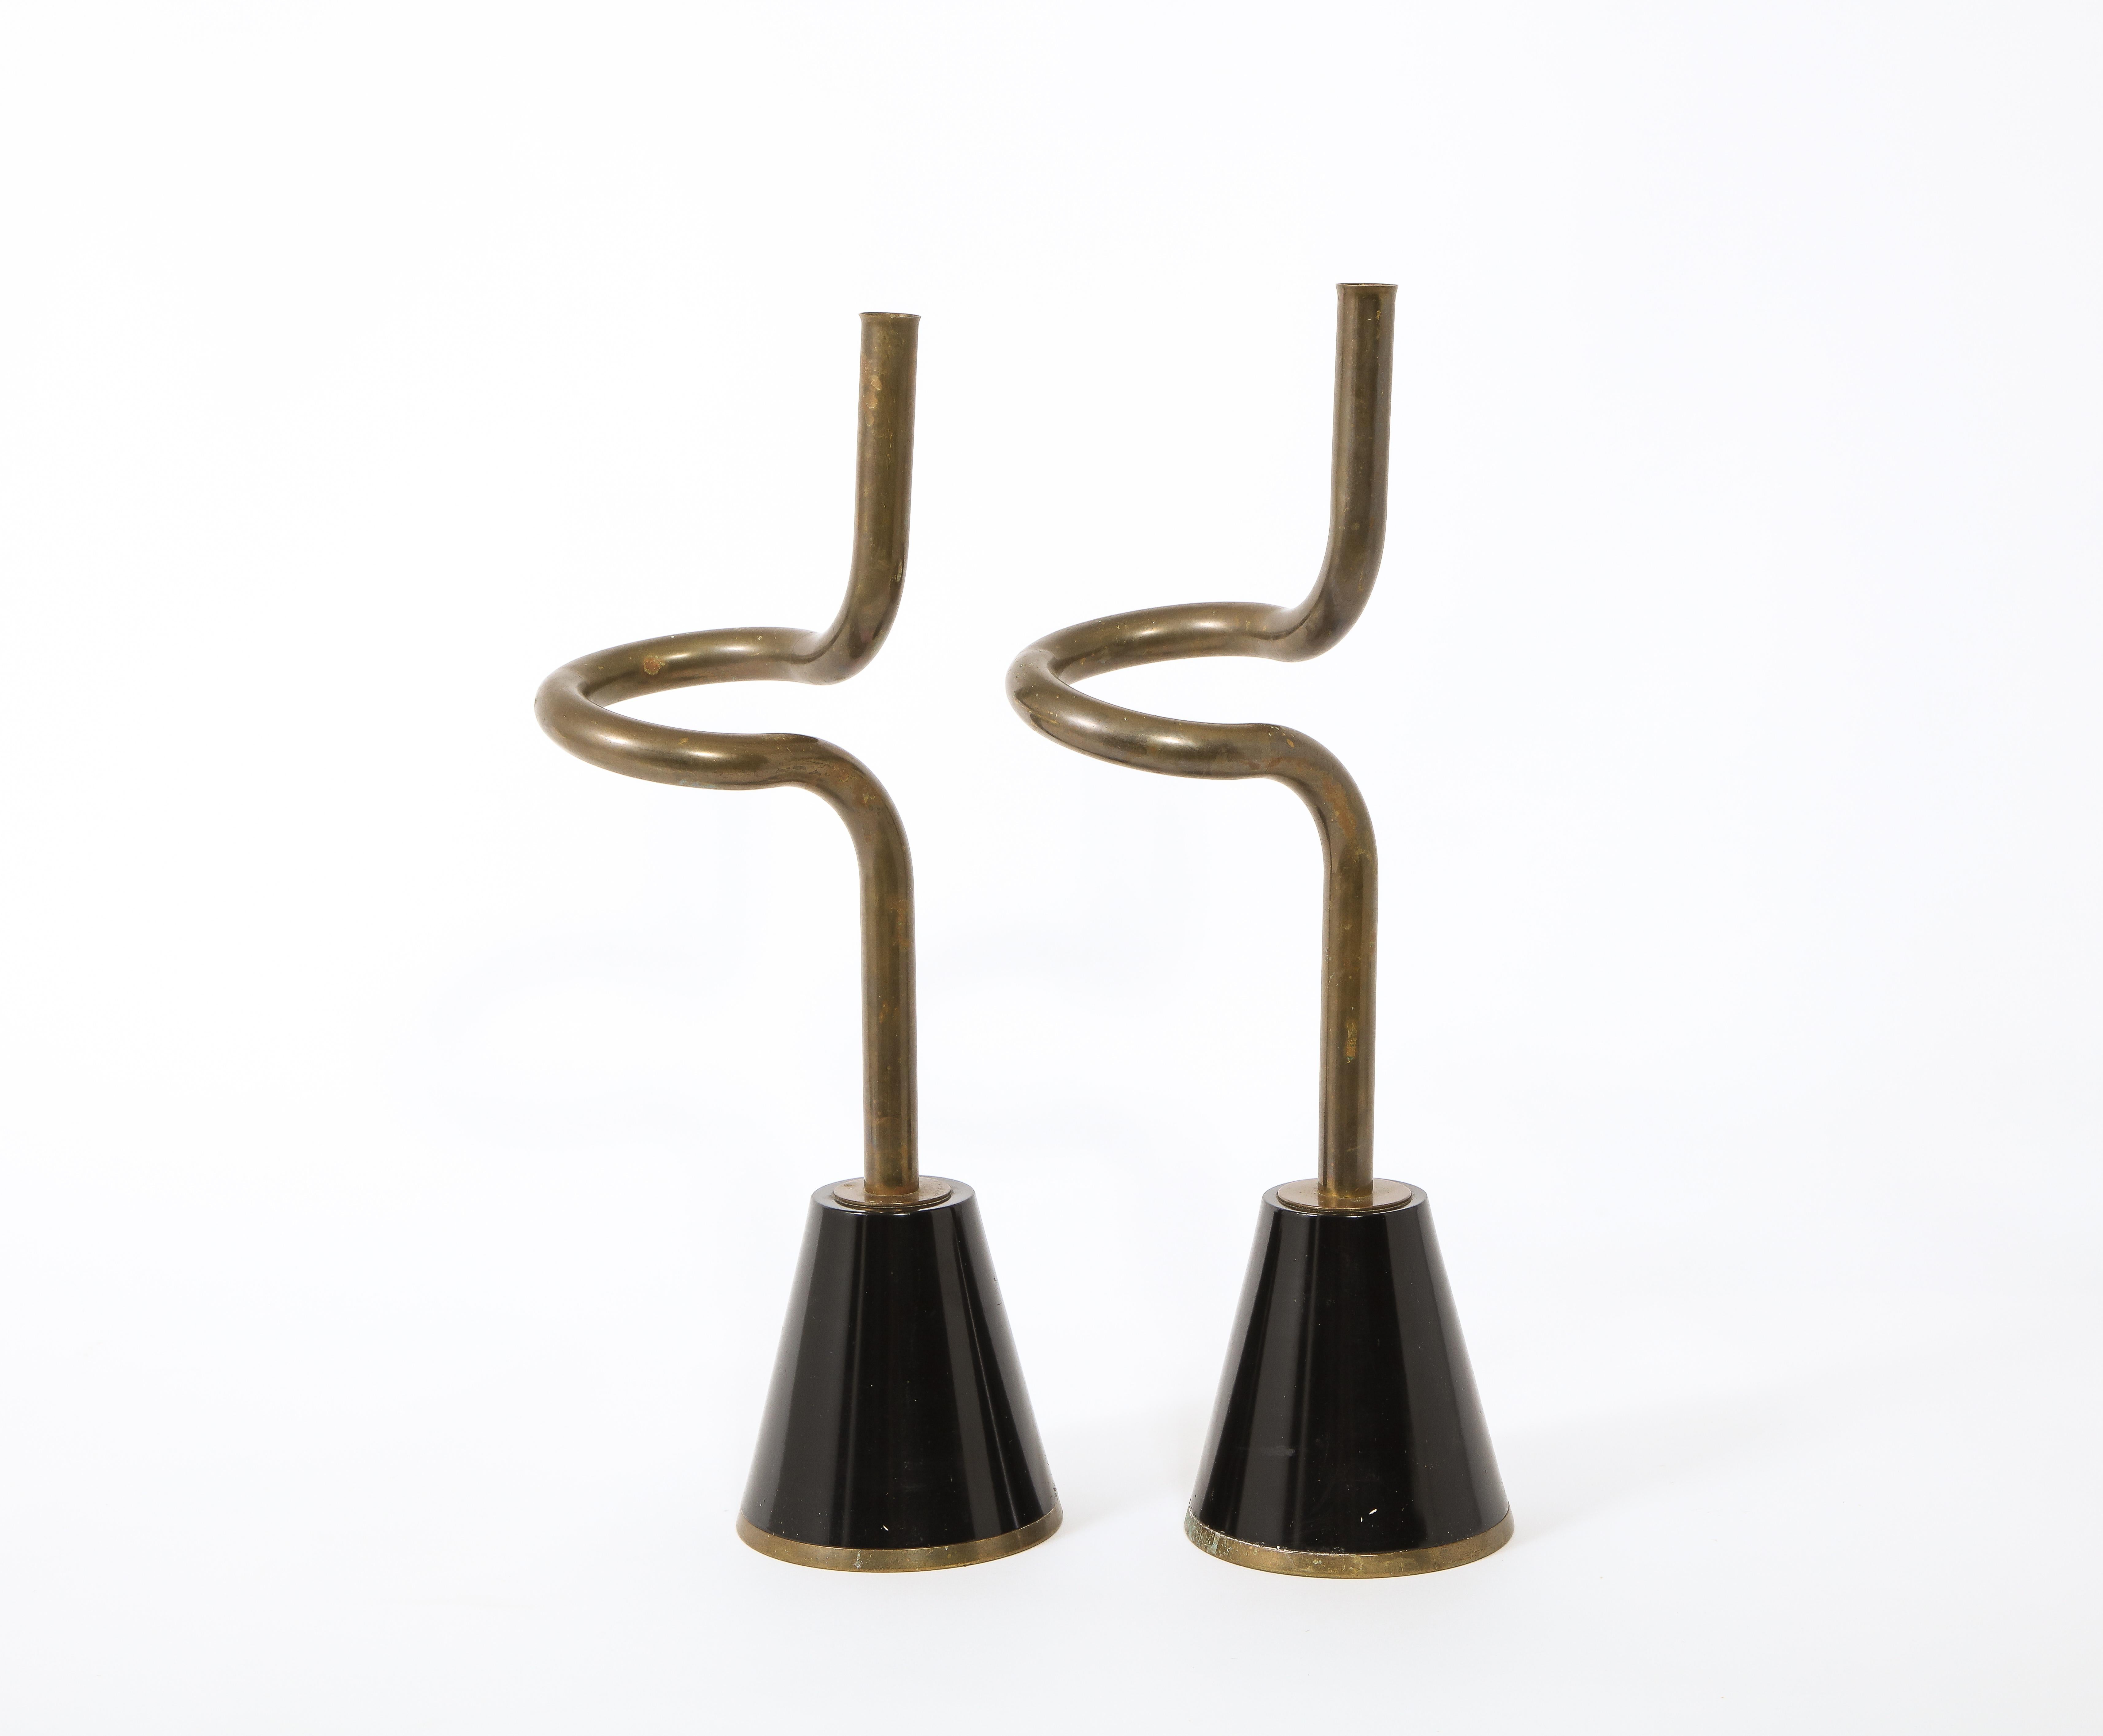 A large pair of spiraling brass and black enameled metal candle holders, reminiscent of Dorothy Thorpe's work.